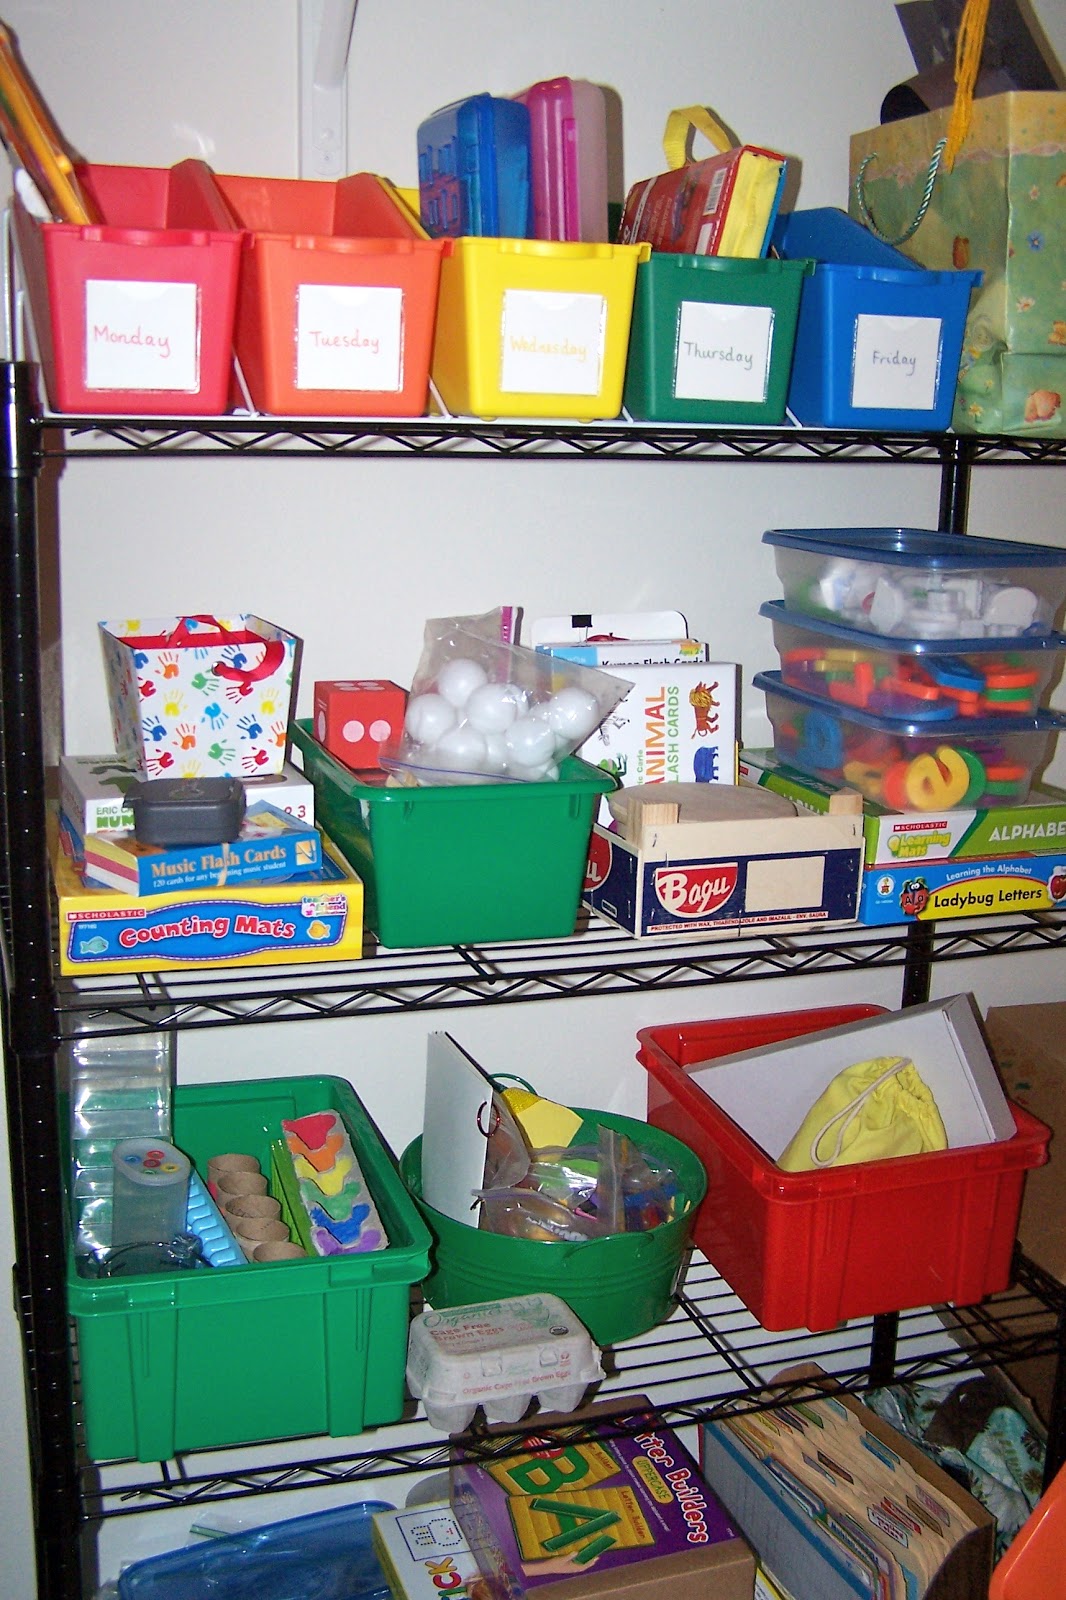 Units Hold Coloring Books And Various Resources I Use For Super Tot